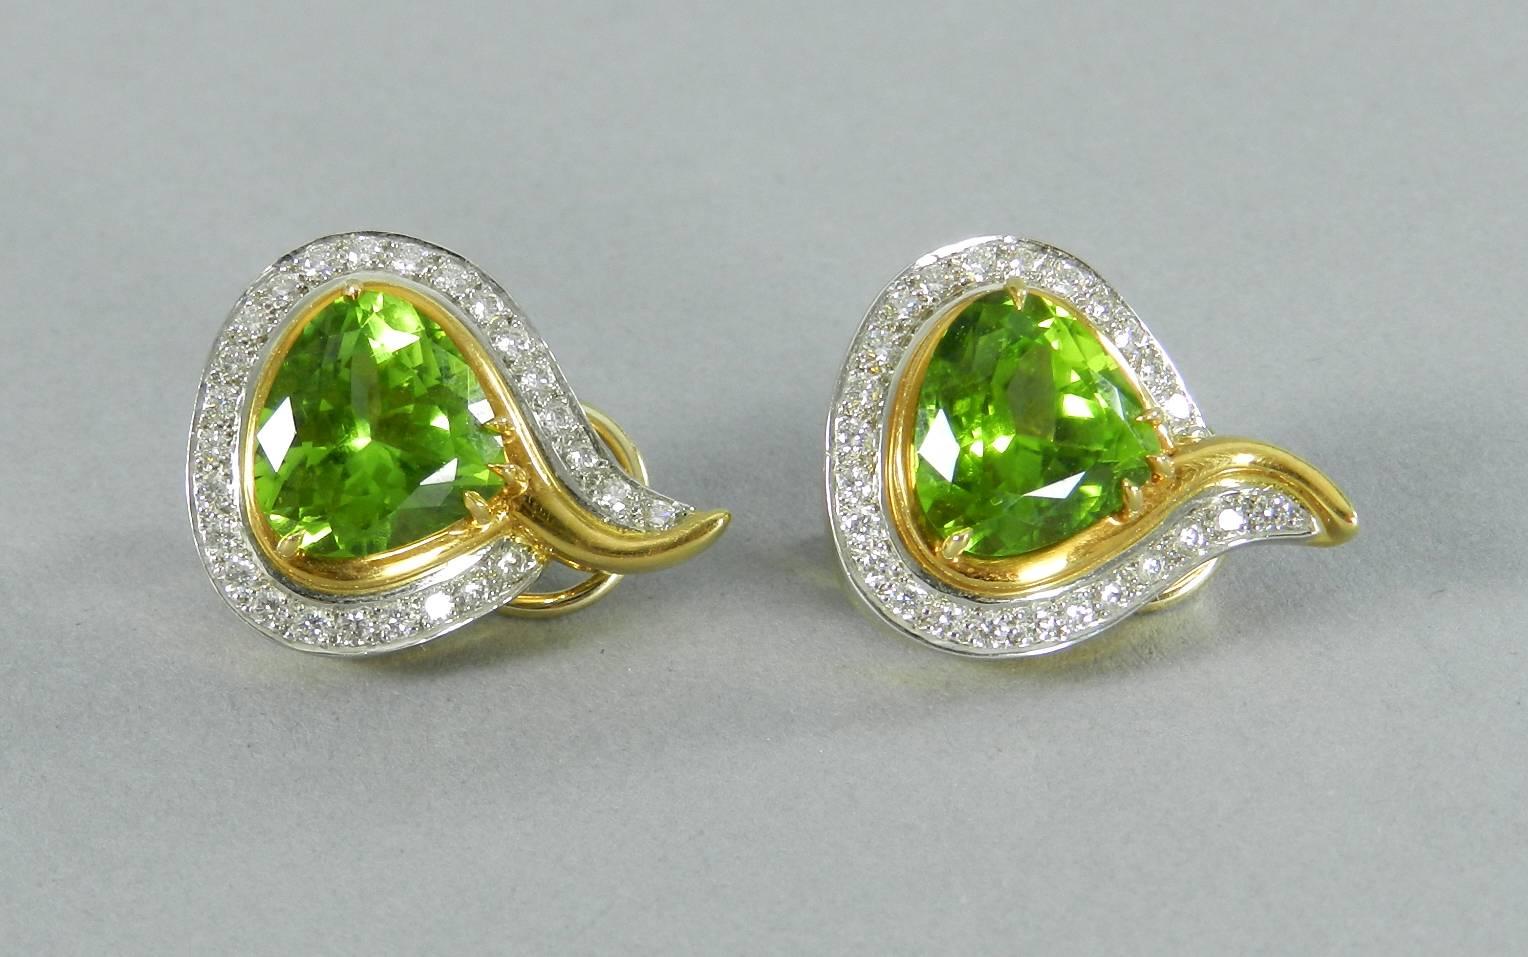 Angela Cummings 18k yellow and white gold earrings with diamonds, and peridot. Clip on. Excellent condition. Hallmarked 1998 Cummings 18k. Measures 1 -1/8" tall and 7.8" wide. 

Shipping prices are for tracked ground service to the US.